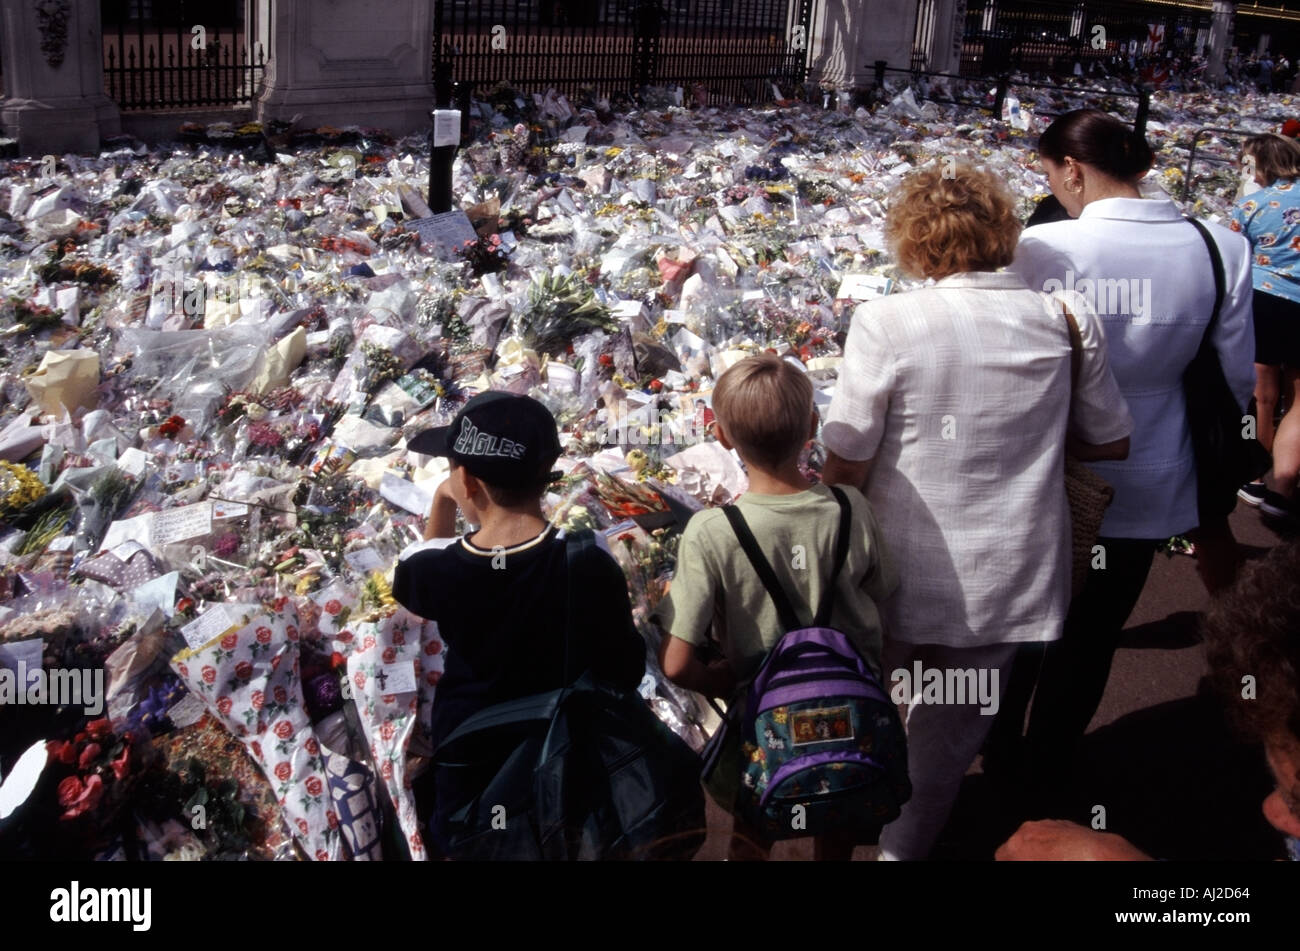 Pavement outside Buckingham Palace London display of floral tributes upon death of Princess Diana Stock Photo